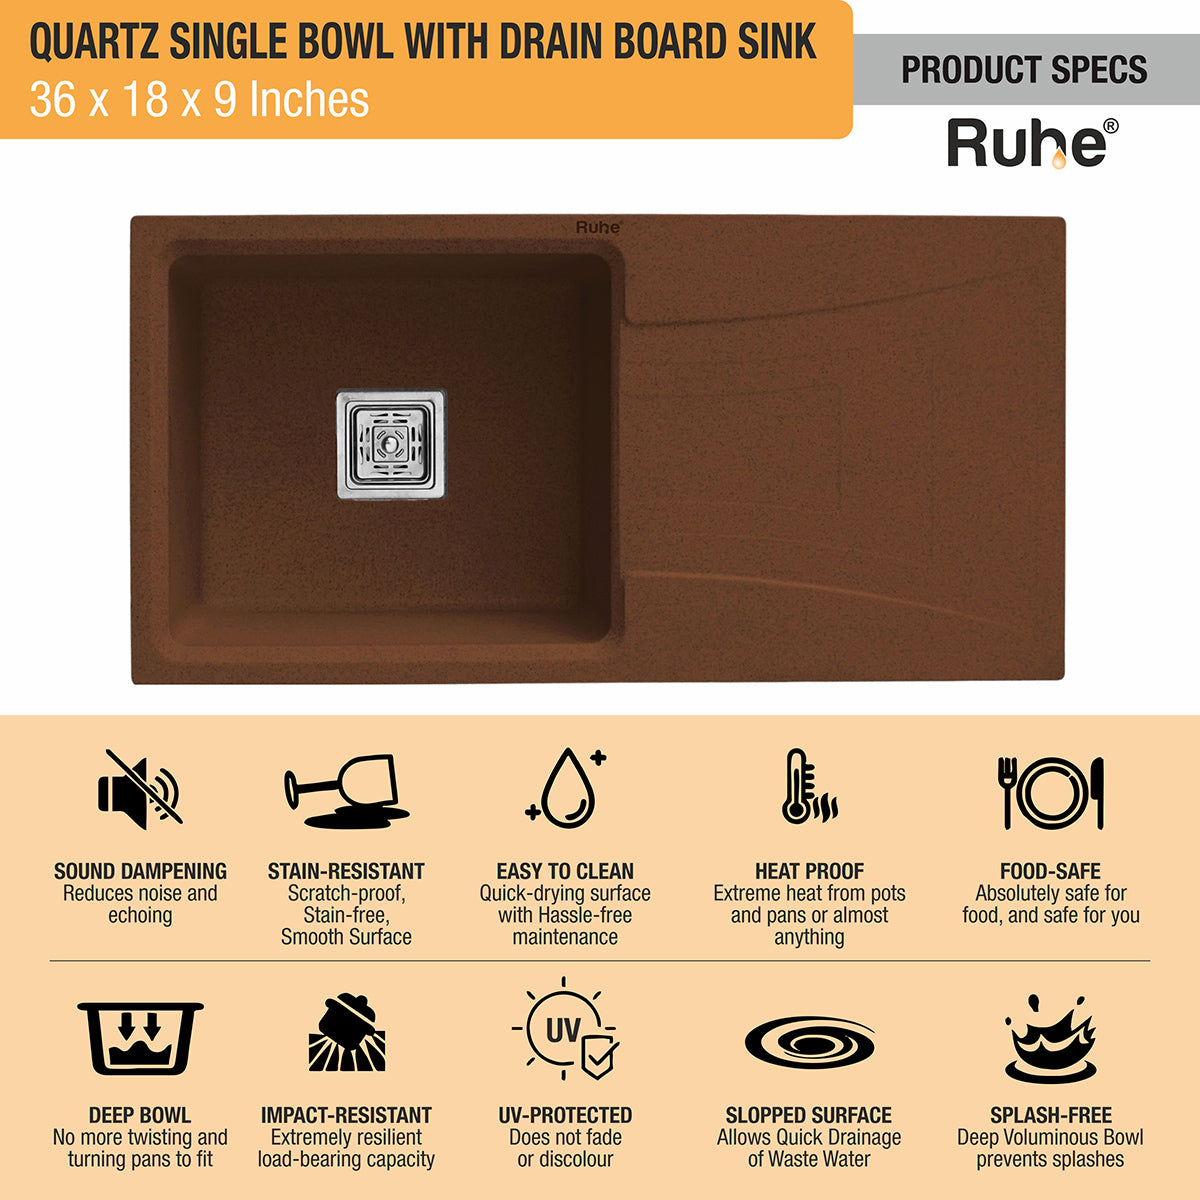 Quartz Single Bowl Choco Brown Kitchen Sink with Drainboard (36 x 18 x 9 inches) features and benefits